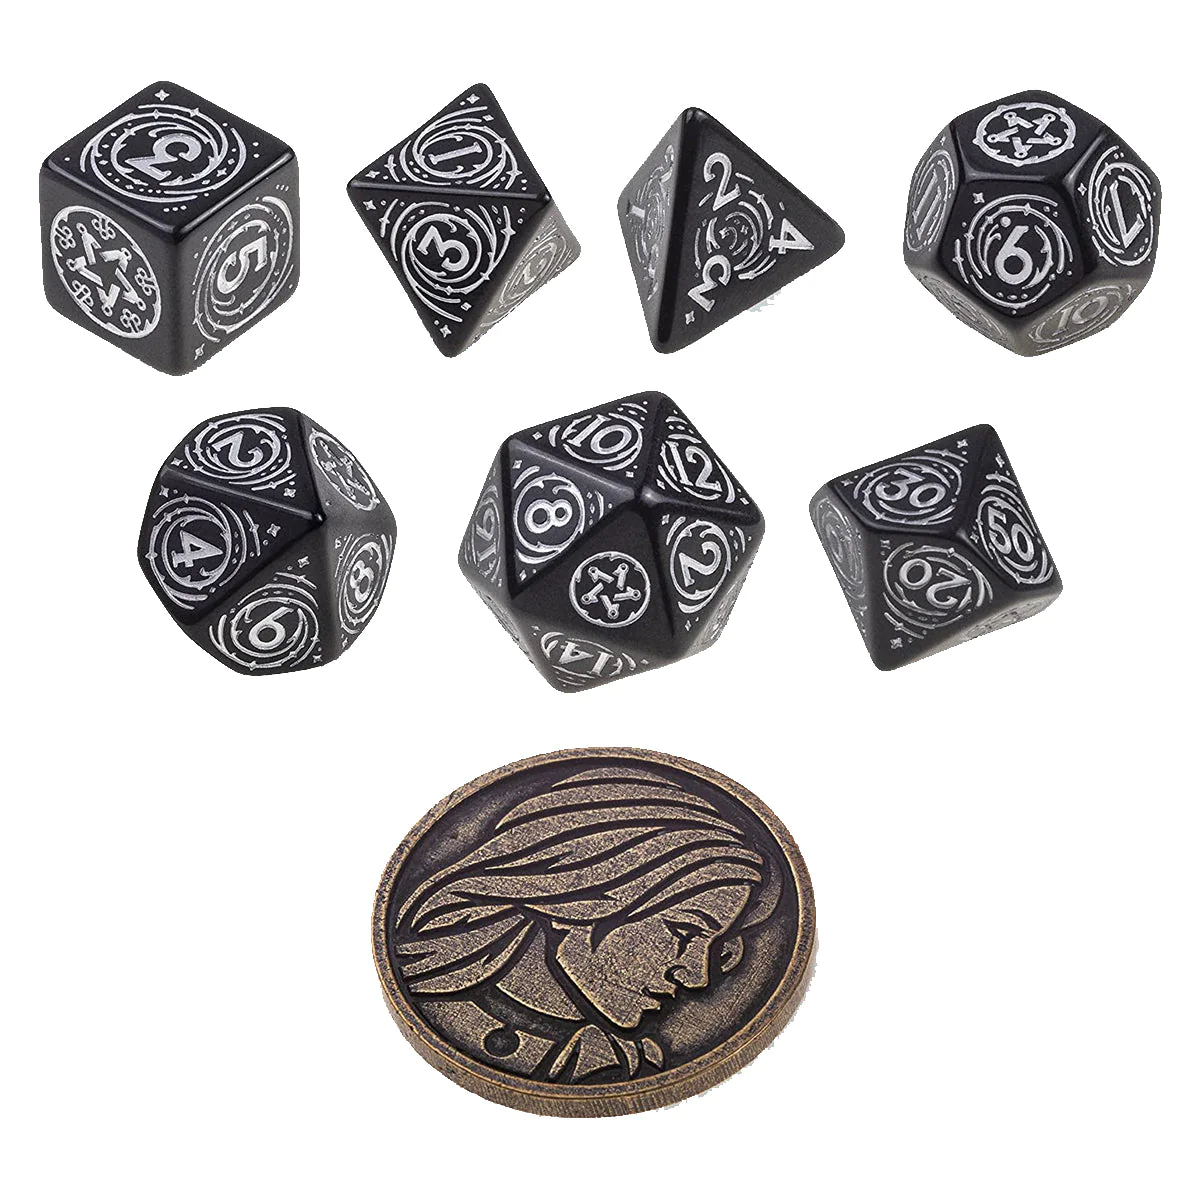 Q Workshop The Witcher Dice Set Yennefer - The Obsidian Star Dice Set 7 with coin